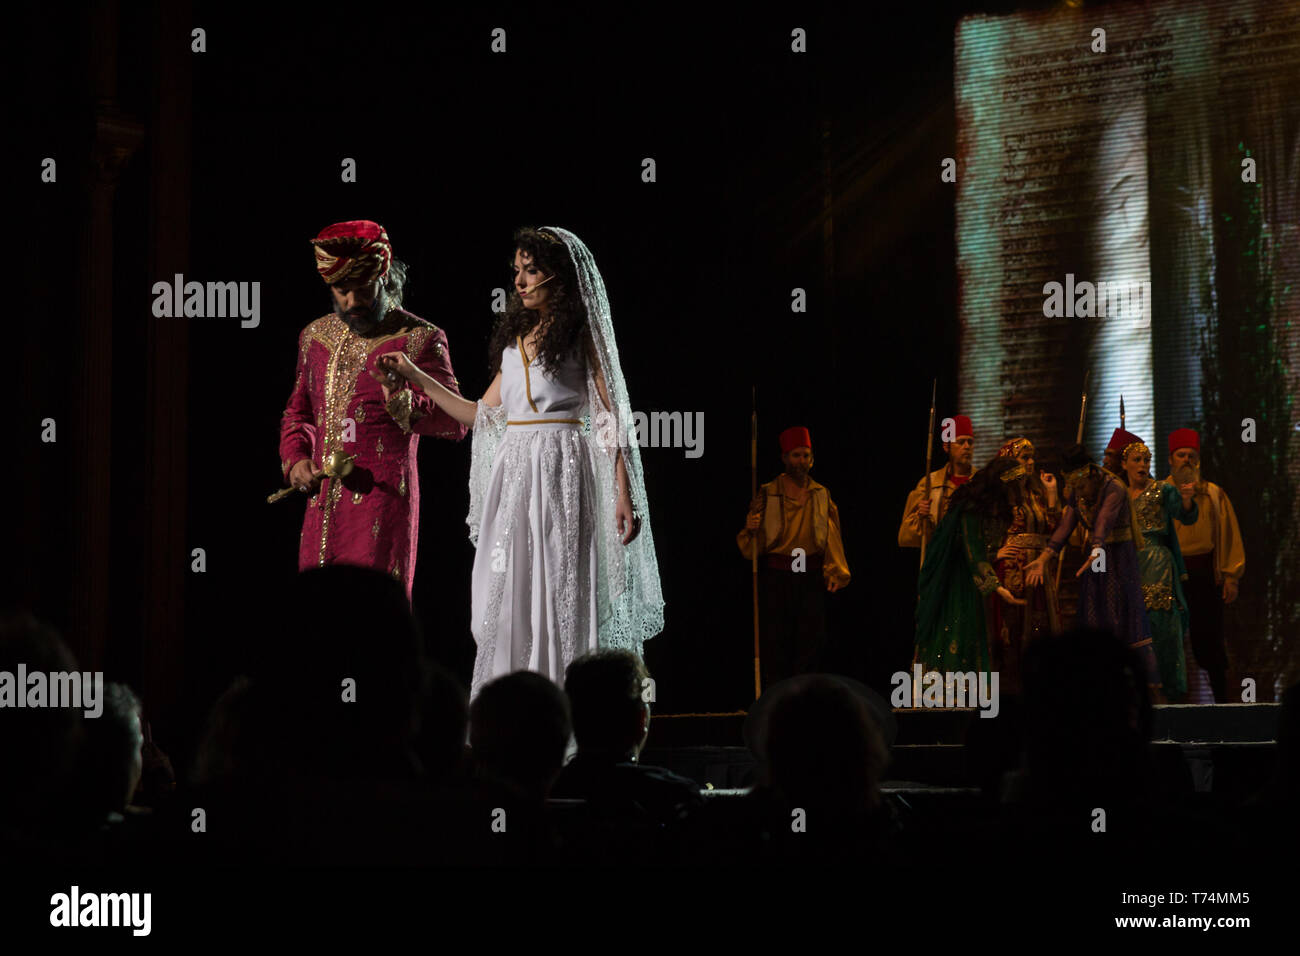 Orlando, Florida, USA. 3rd May, 2019. Actors perform ''The Empire and the Kingdom'' (part one) in the Church of All Nations in The Holy Land Experience (HLE) in Orlando, Florida. The theme park, owned by the Trinity Broadcasting Network, recreates the architecture and themes of the ancient city of Jerusalem in 1st-century Judea. HLE is a non-denominational Christian living biblical museum and church. The park opened in February 2001. There are multiple live performances given throughout various locations each the day in the park. Credit: Tracy Barbutes/ZUMA Wire/Alamy Live News Stock Photo